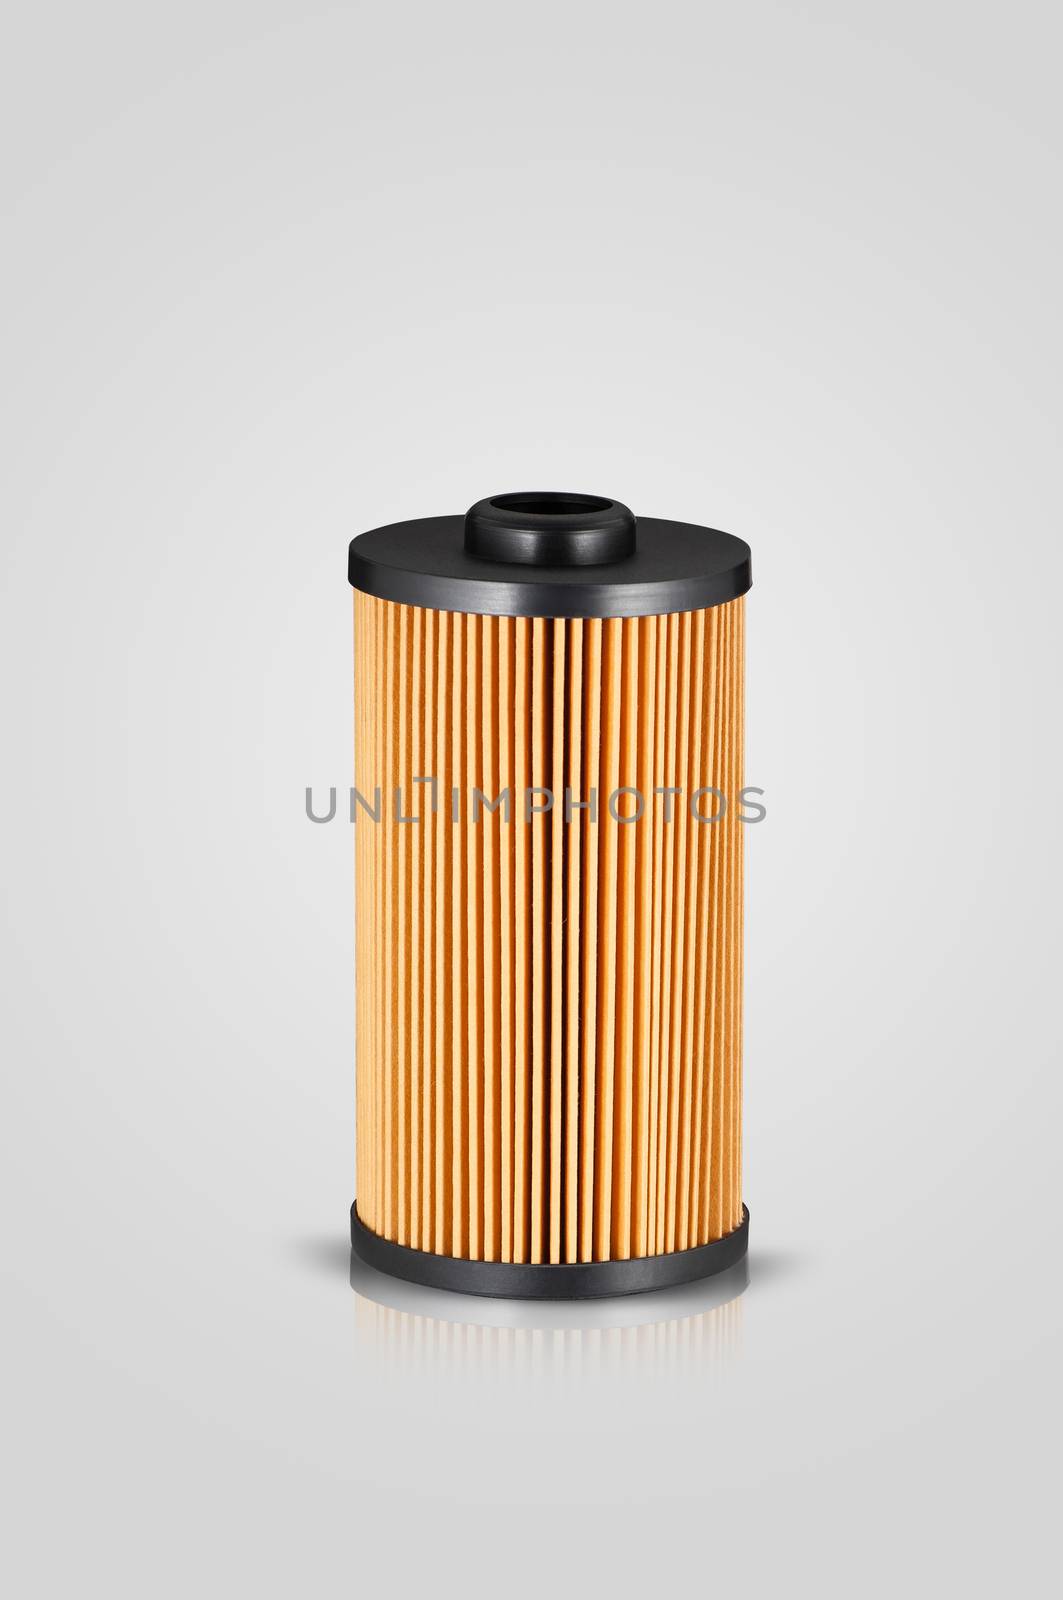 automotive filter cylindrical shape of orange color on a white background with reflection